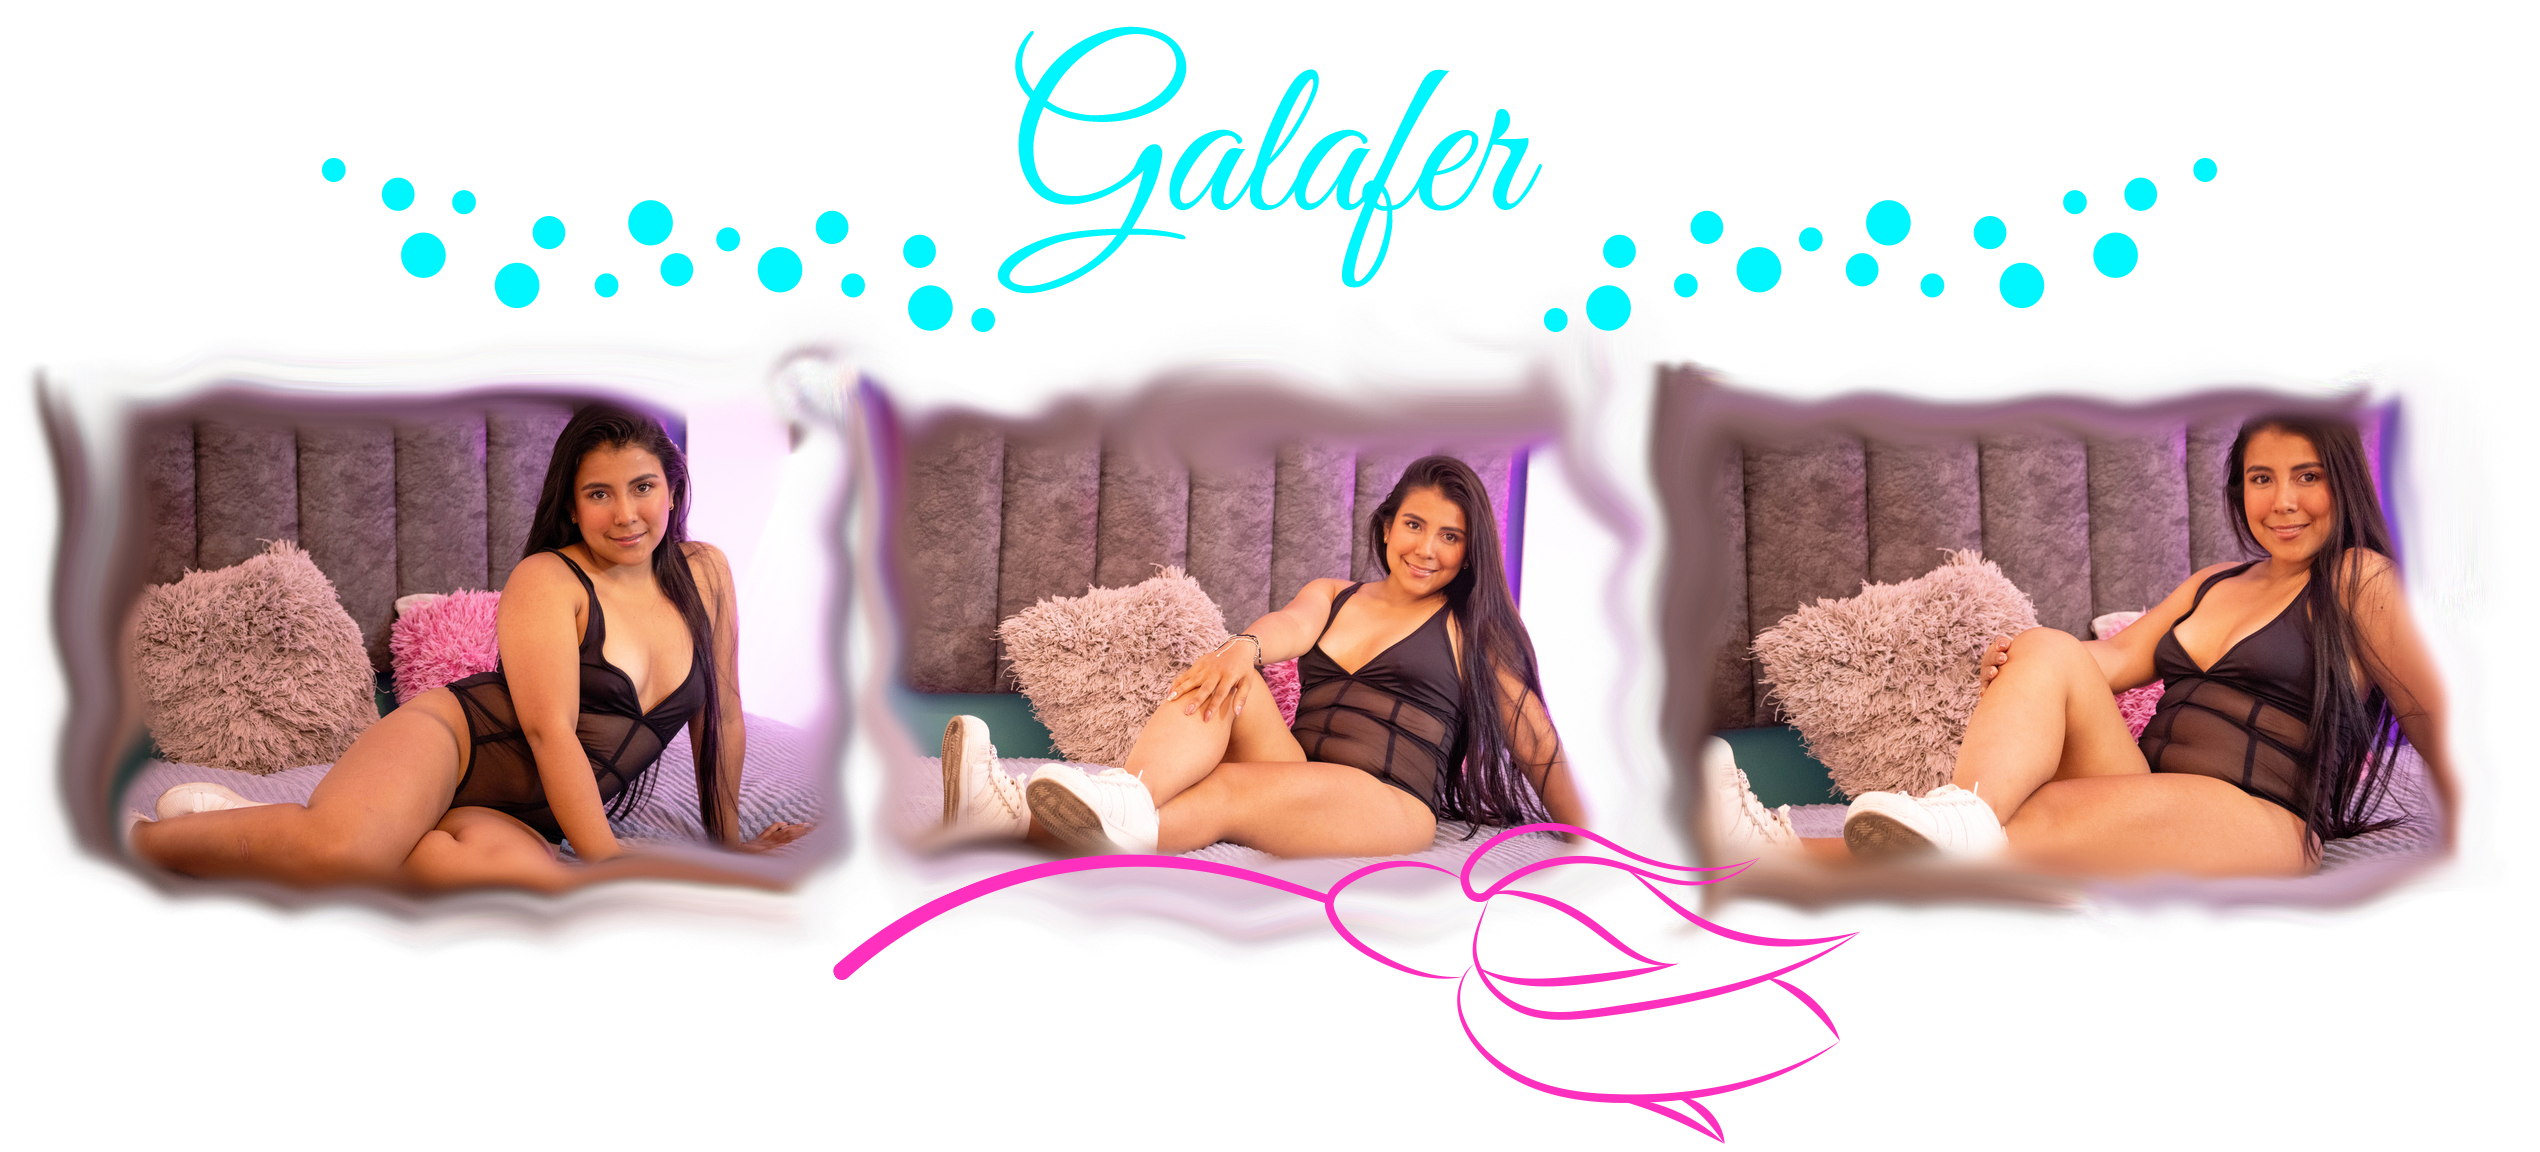 Galafer Hello! Welcome to my page! image: 2